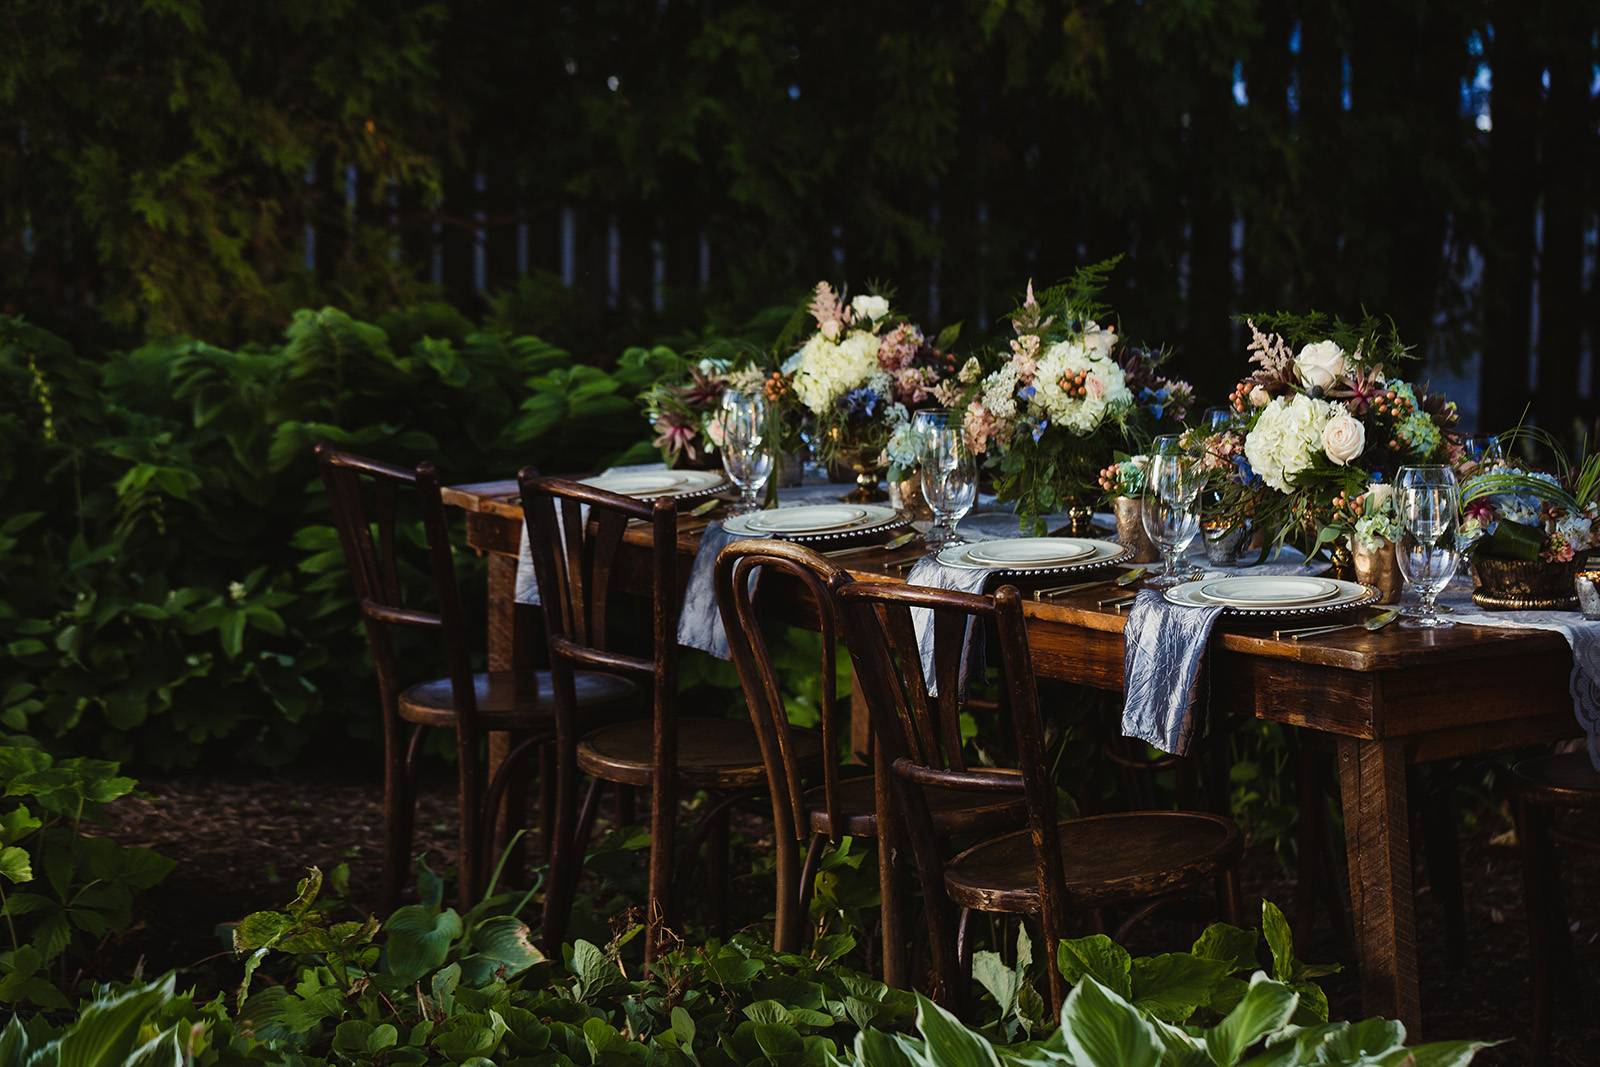 wedding dinner table reception ideas harvest table vintage wood chairs centerpieces forest fairytale